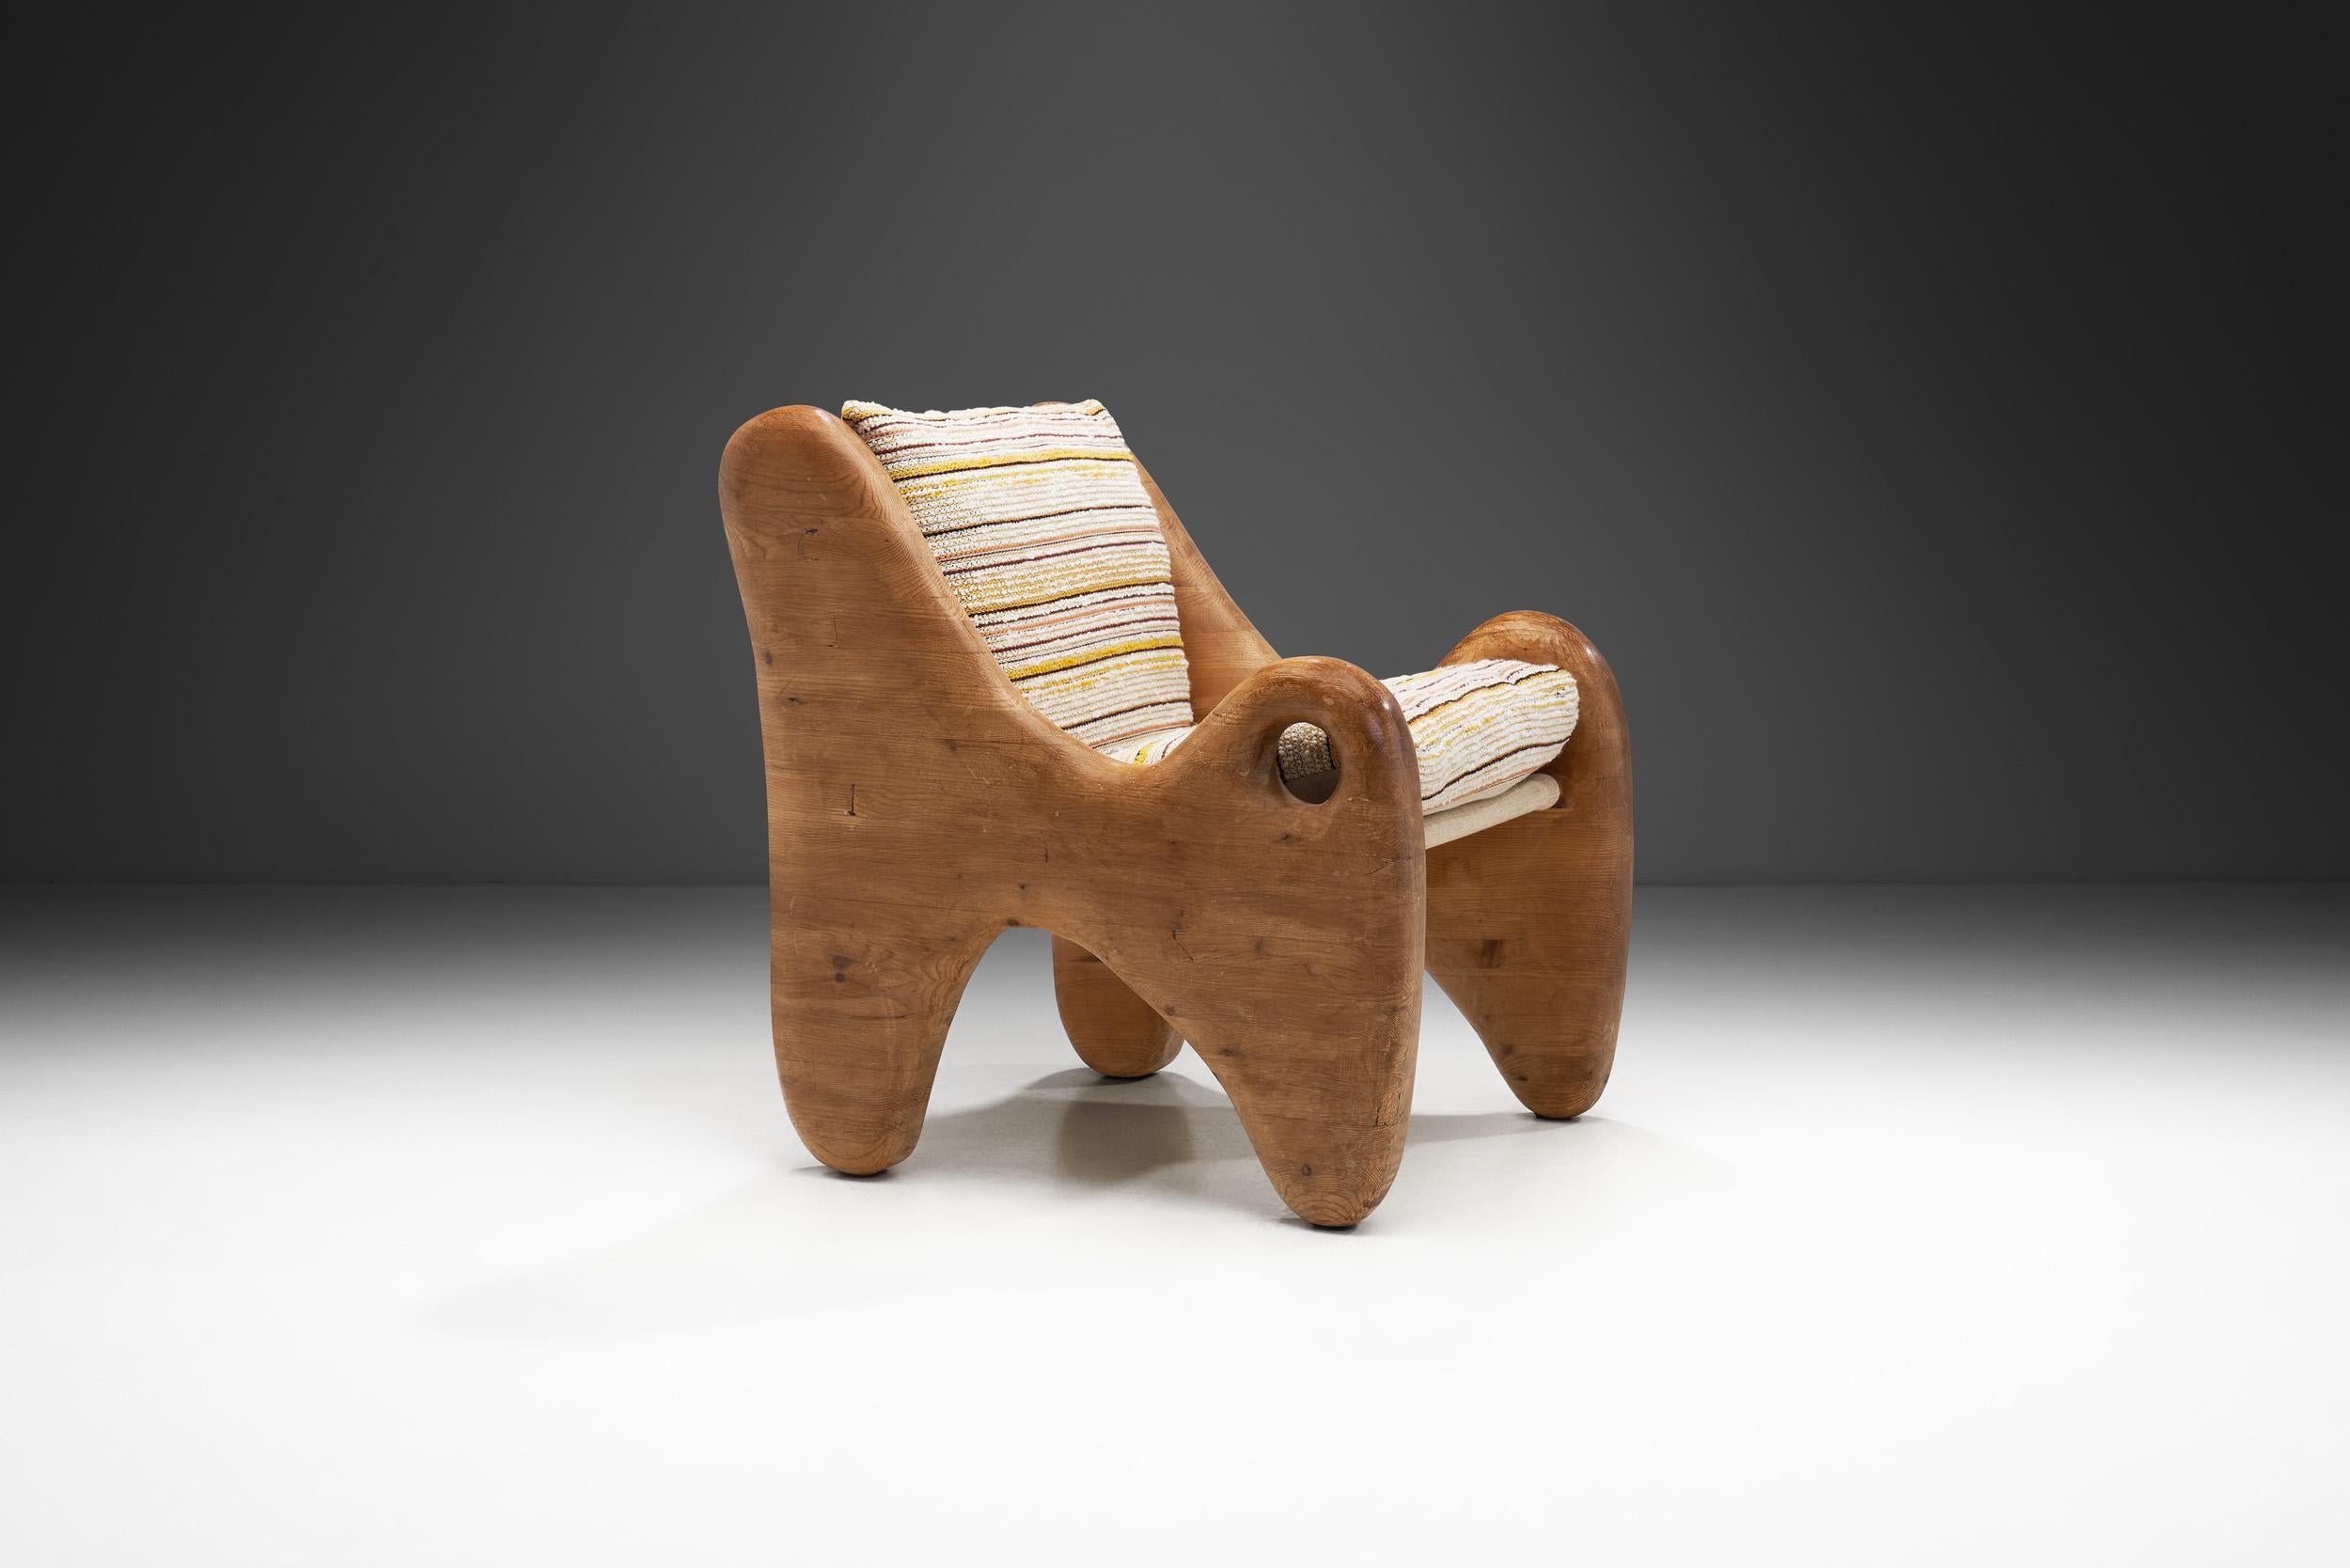 The 1960s were a decade of artistic experimentation in design, and this uniquely shaped eccentric wooden French chair stands as a testament to that creative spirit. This chair is a true fusion of form and function, blurring the line between